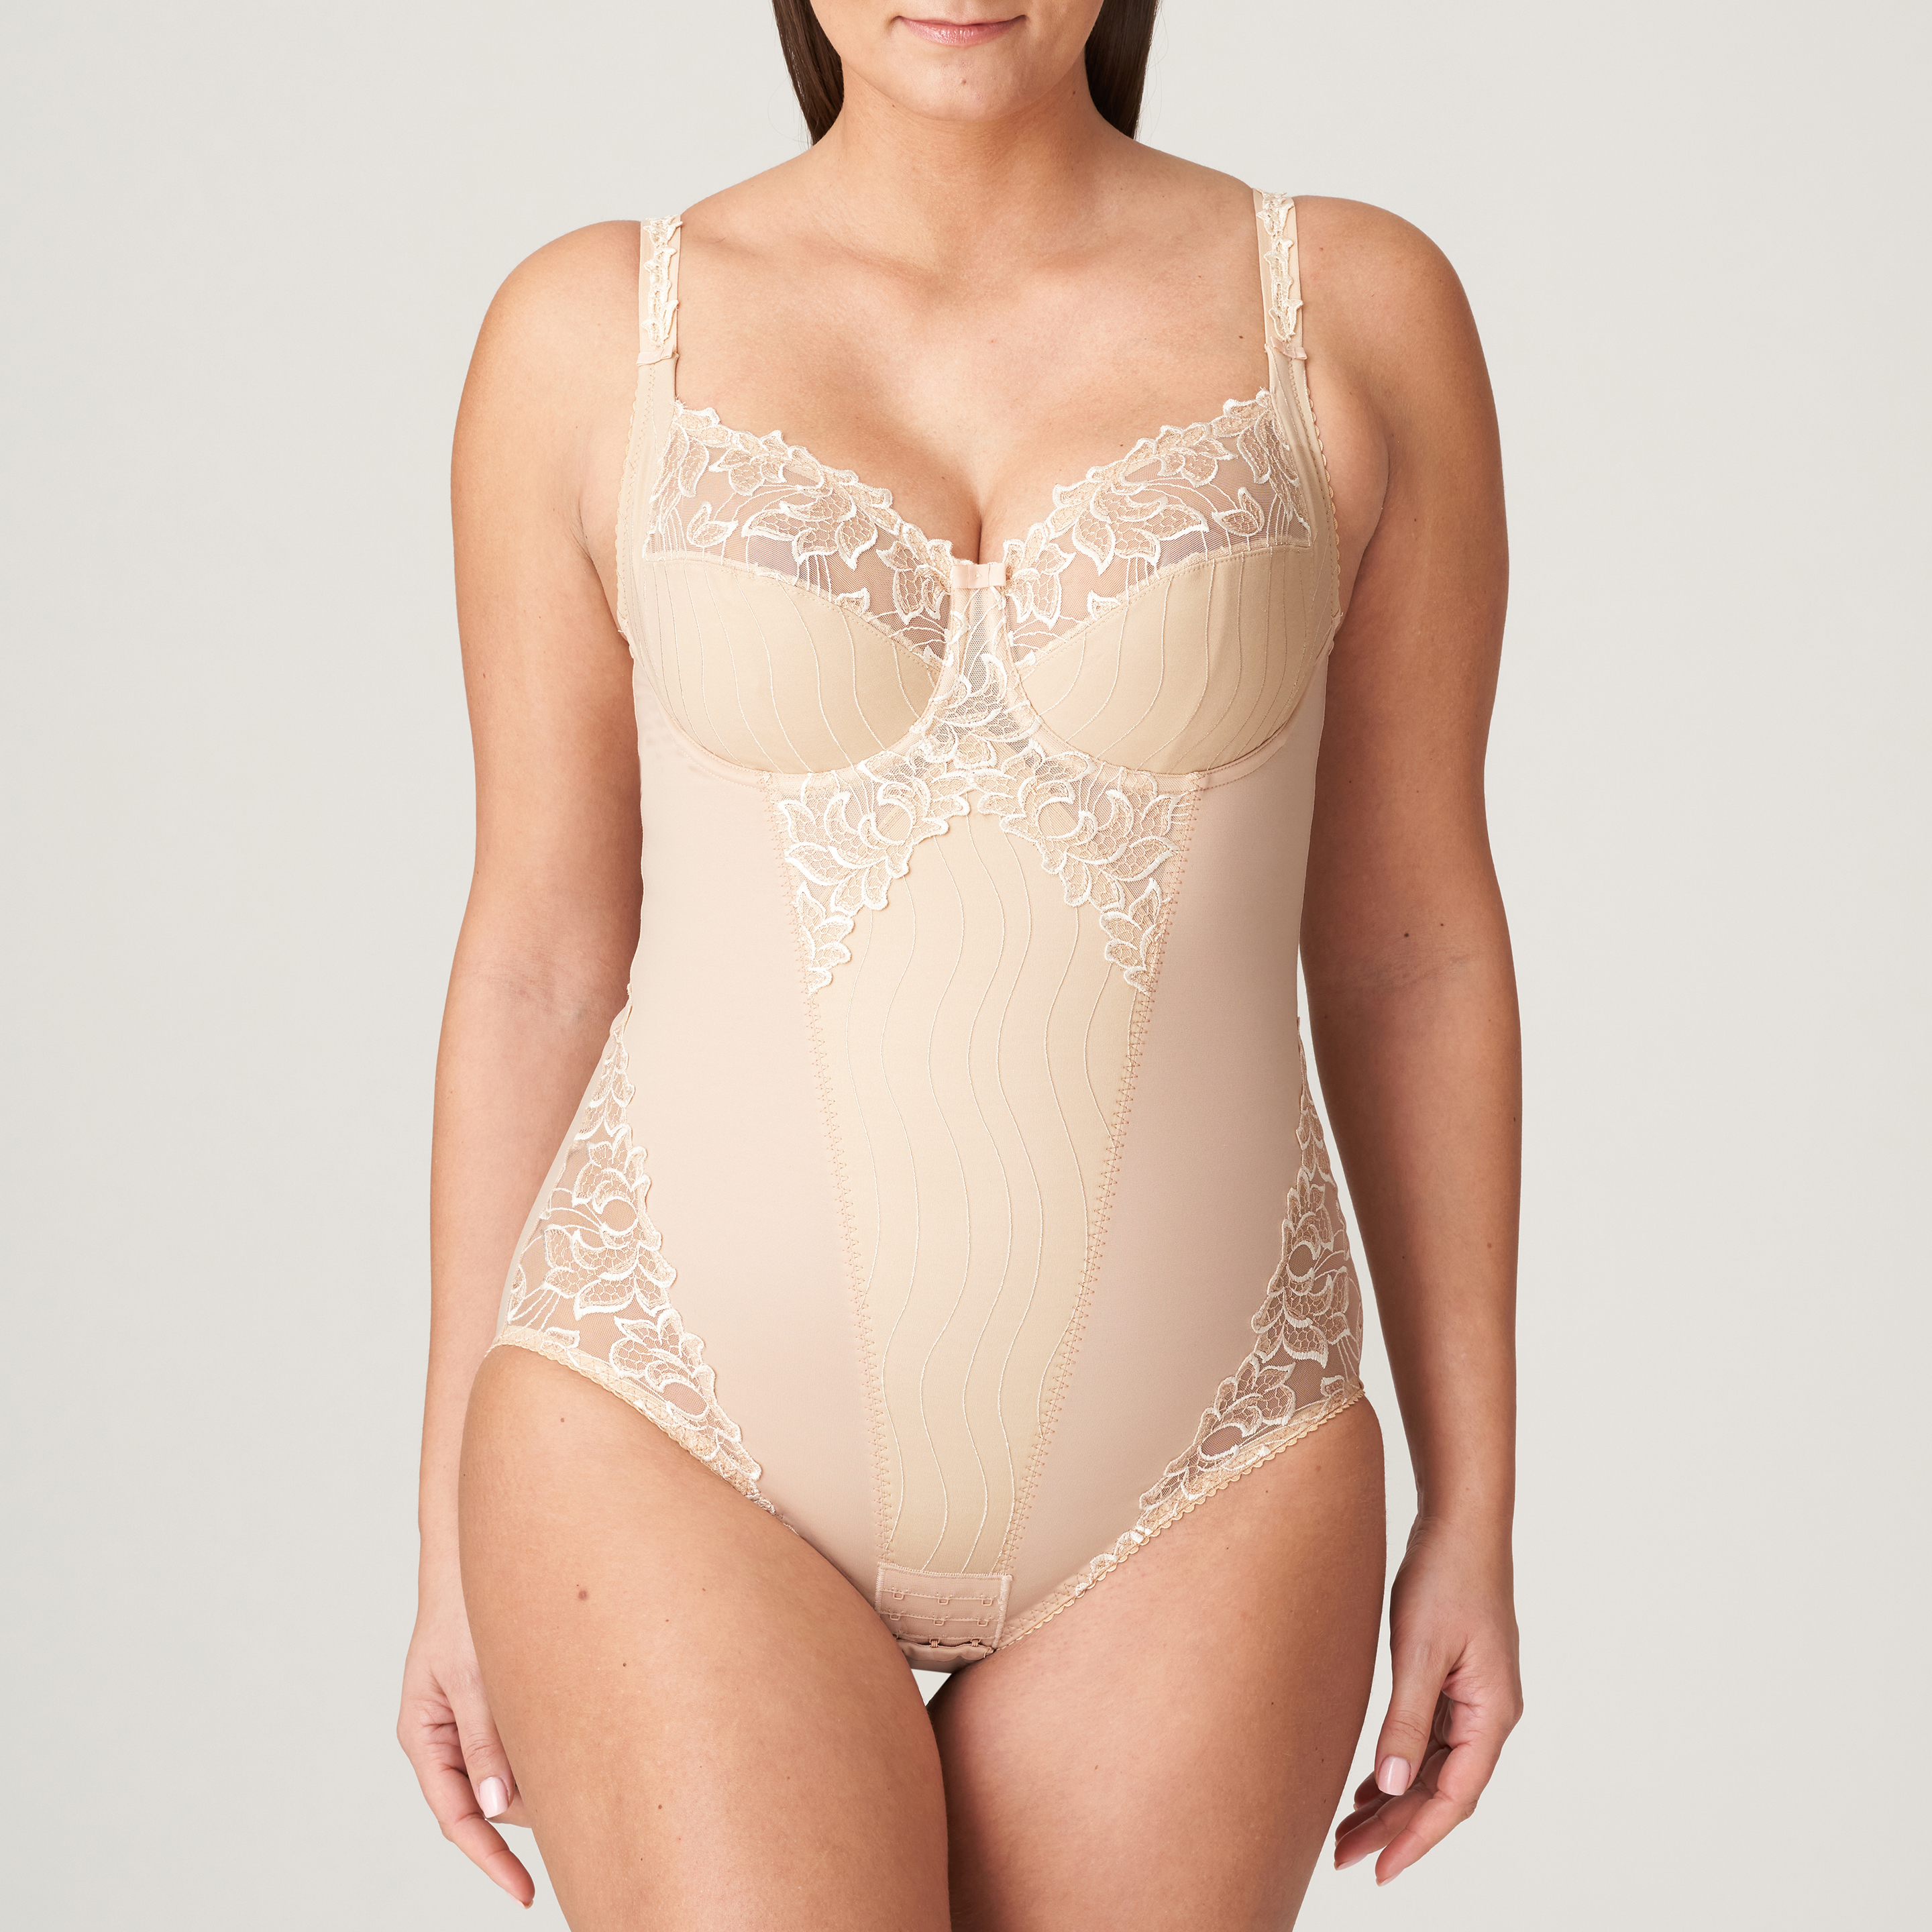 PrimaDonna DEAUVILLE natural full cup body